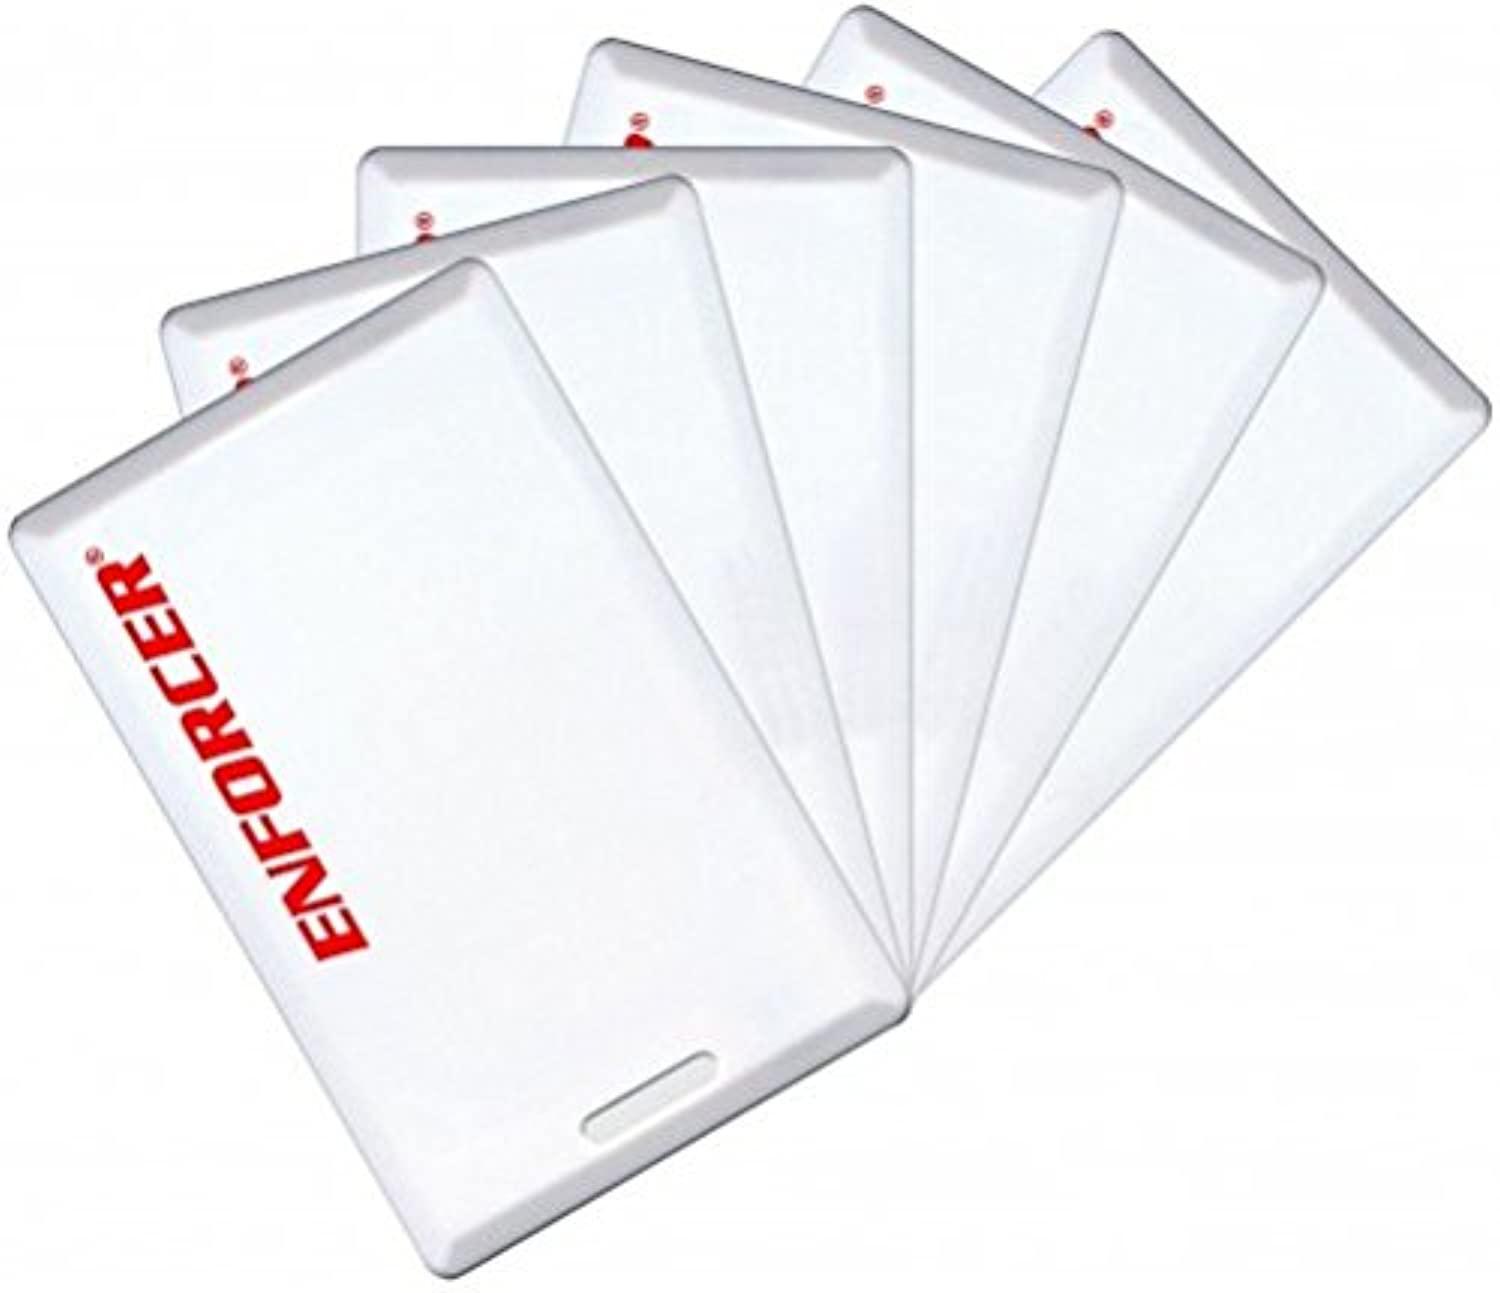 seco-larm pr-k1s1-a proximity cards, compatible with all seco-larm proximity readers, sold in pack of 10 cards, frequency: 12